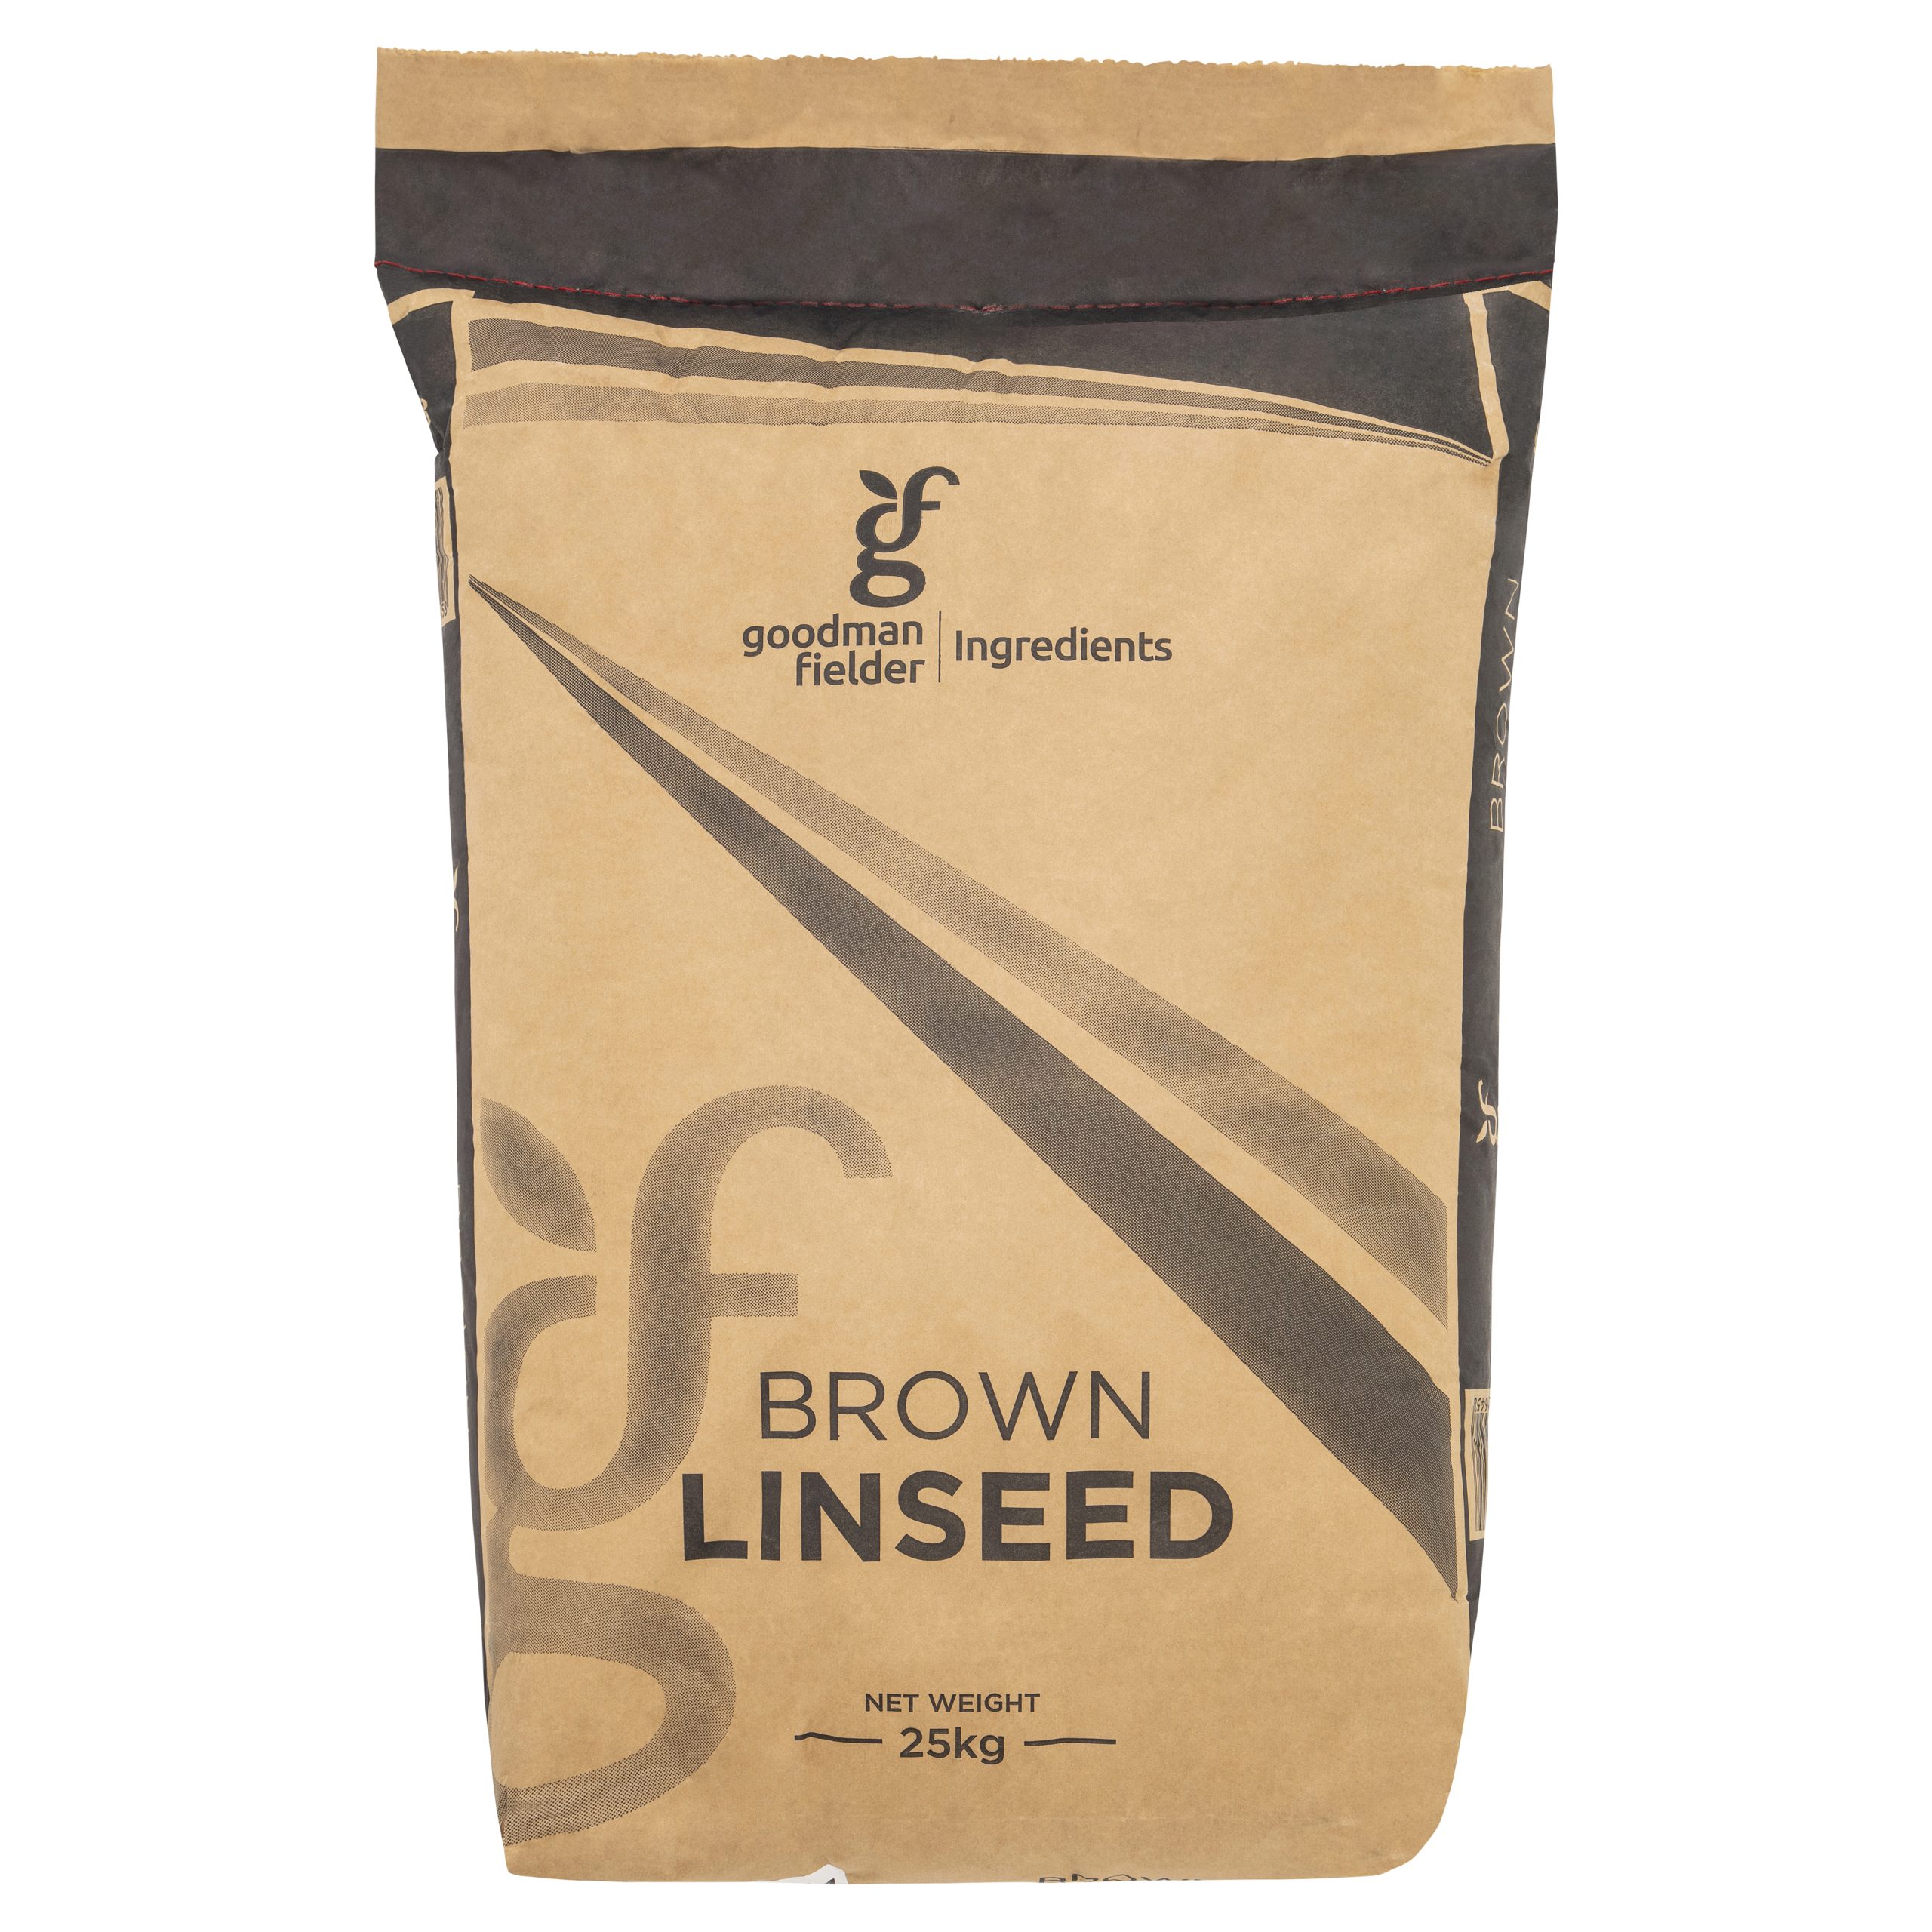 GFIG SEEDS LINSEED BROWN 25KG product photo